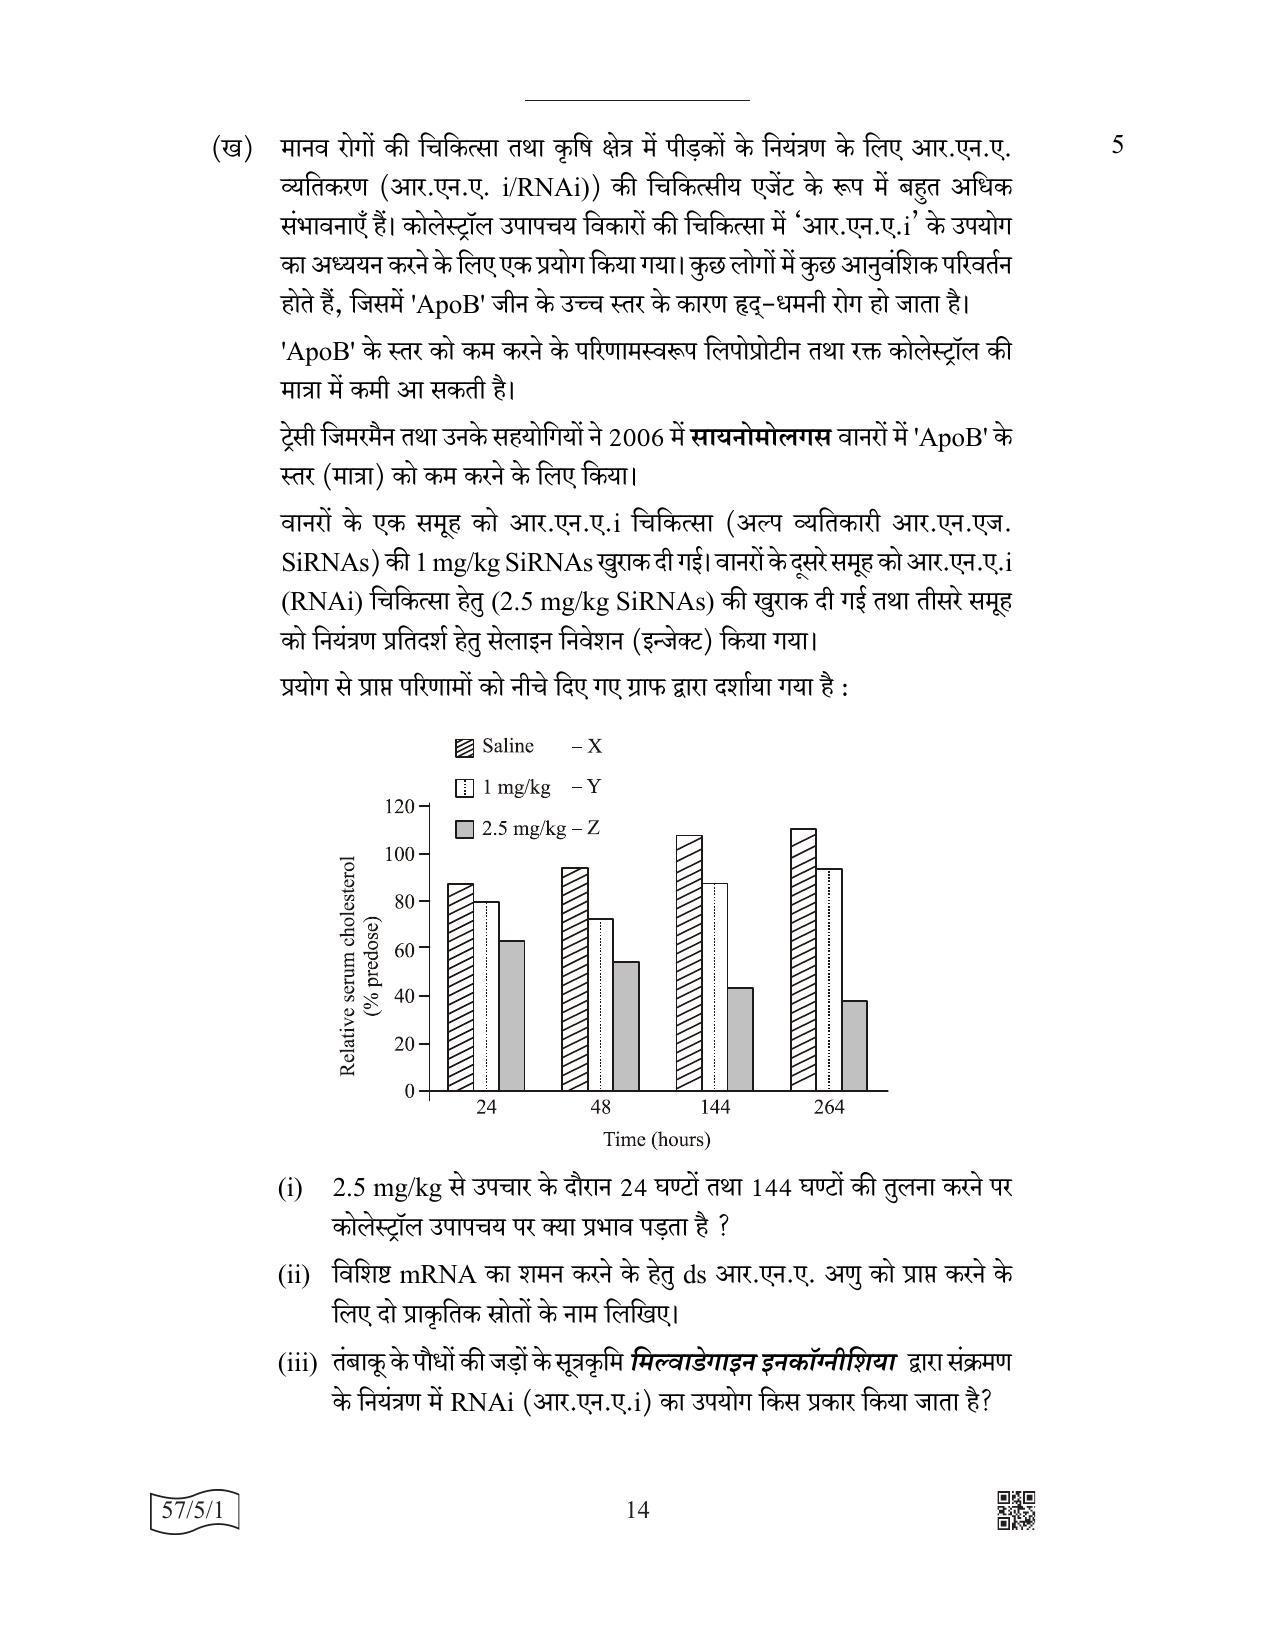 CBSE Class 12 57-5-1 Biology 2022 Question Paper - Page 14